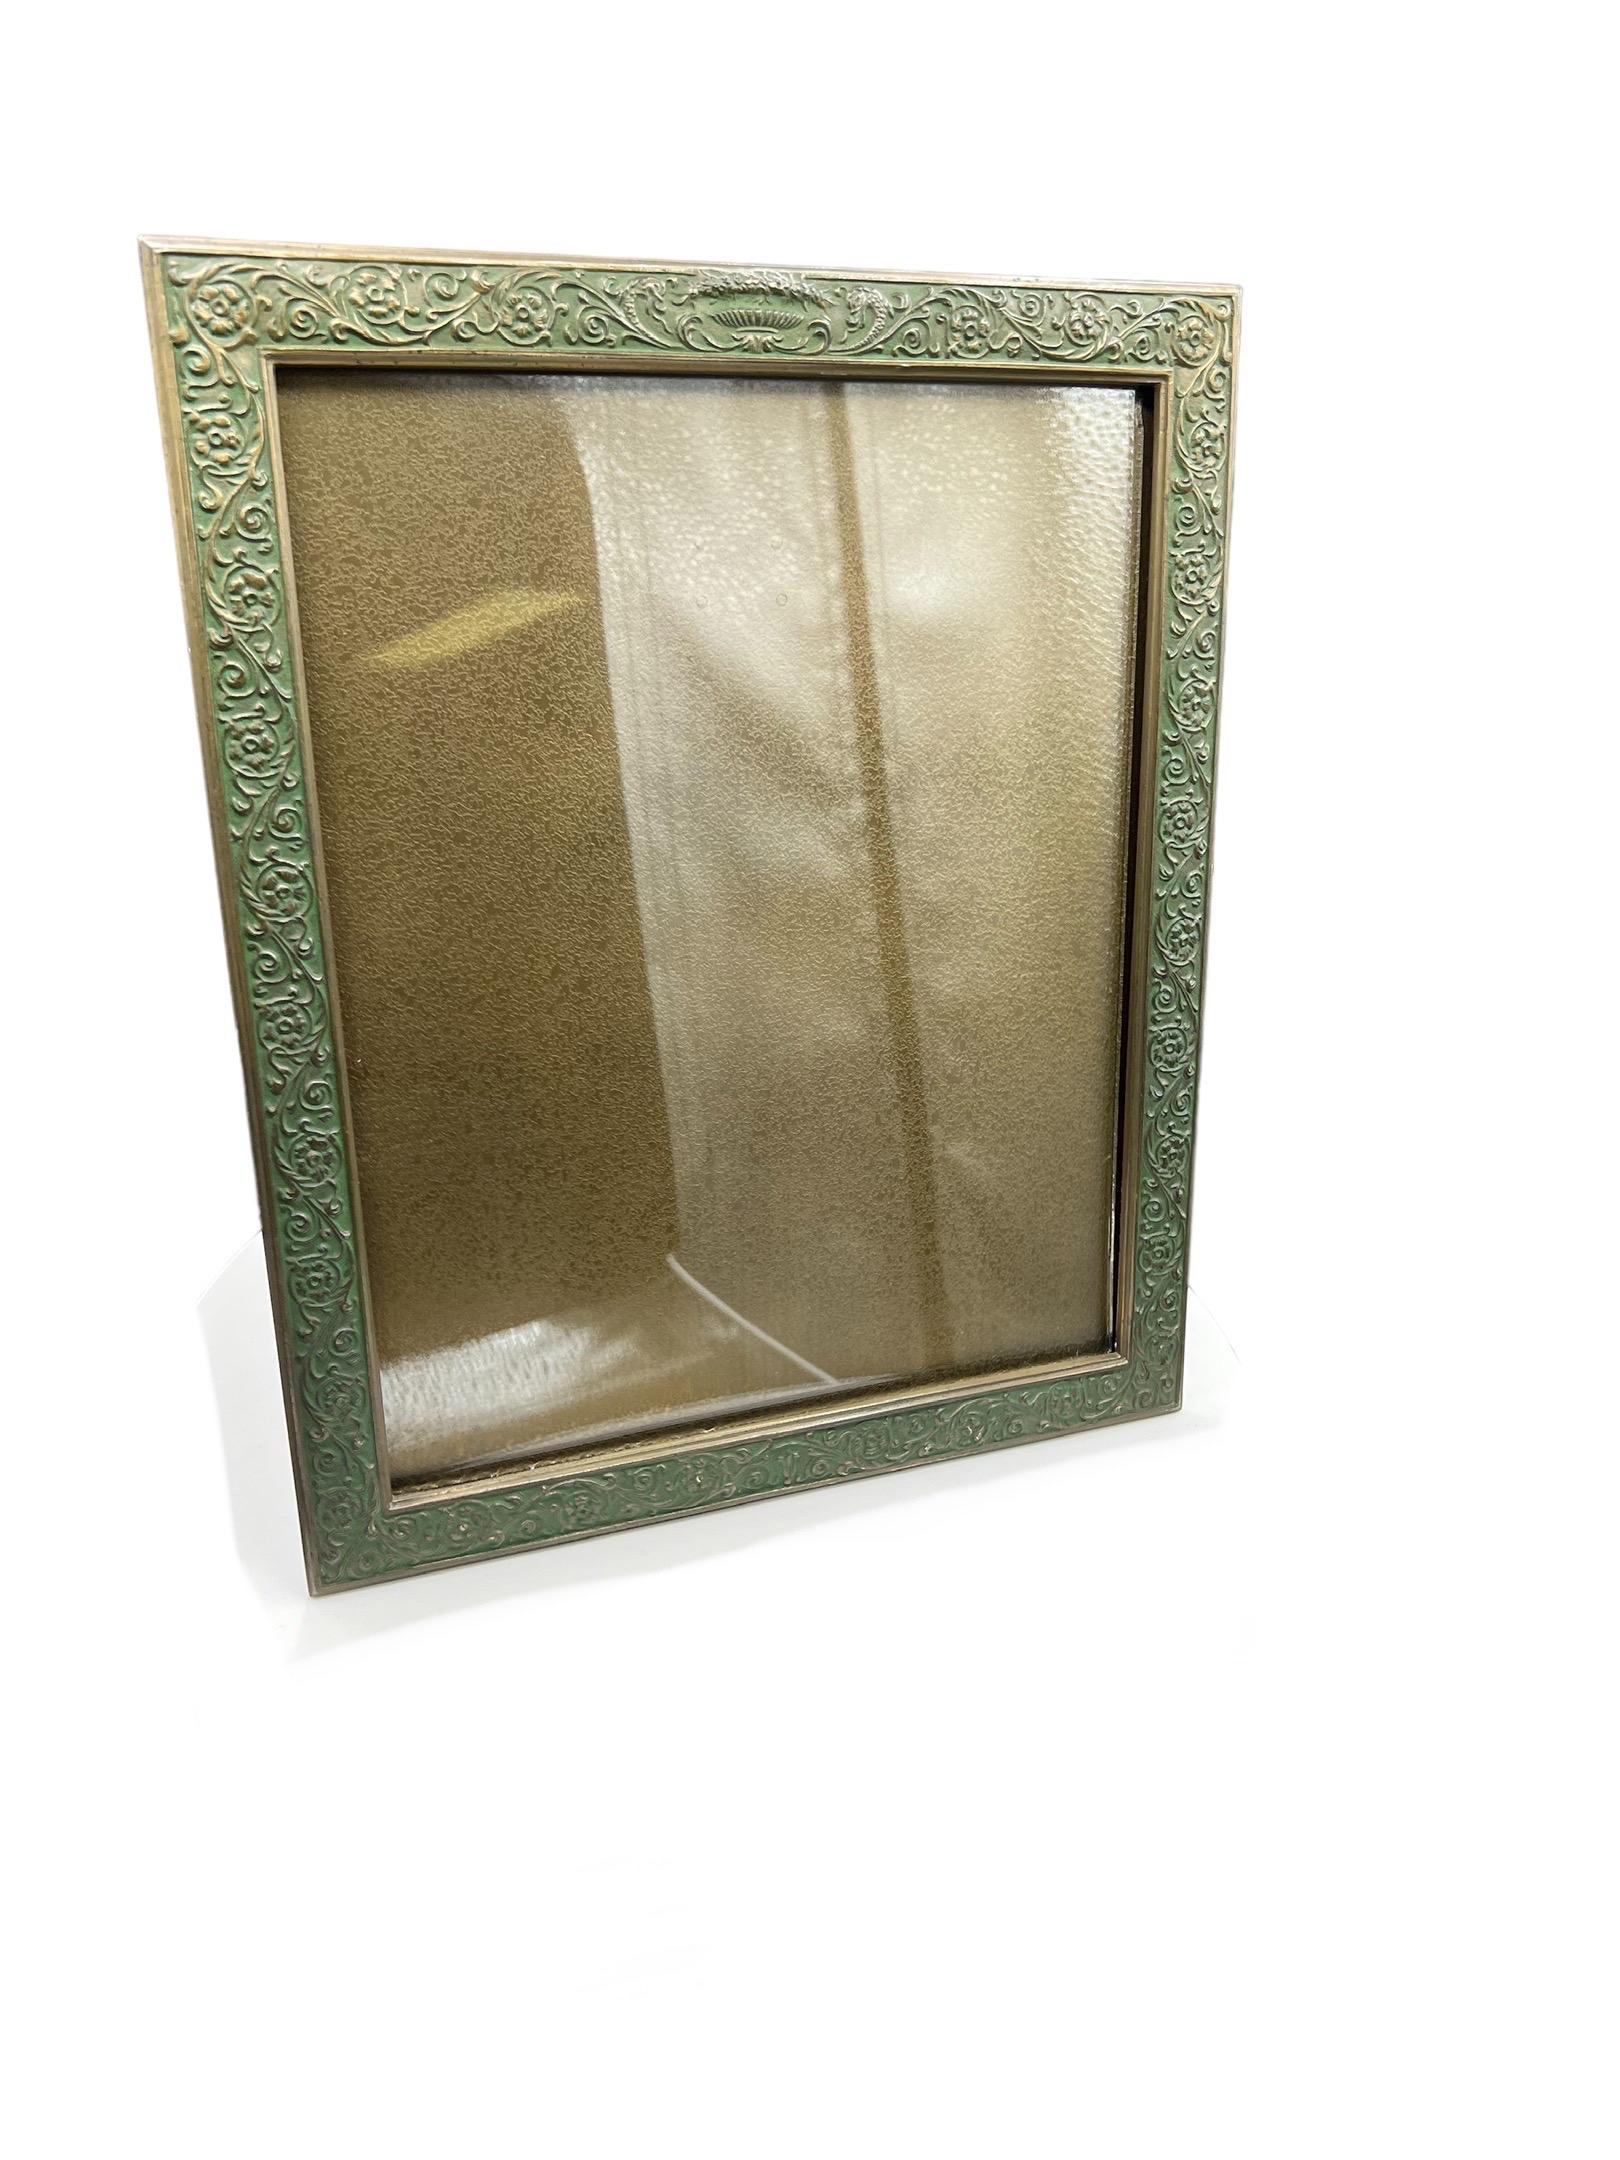 Belle Époque Tiffany Studios gilt-bronze picture frame, Stamped Tiffany Studios/NY/1611. For Sale